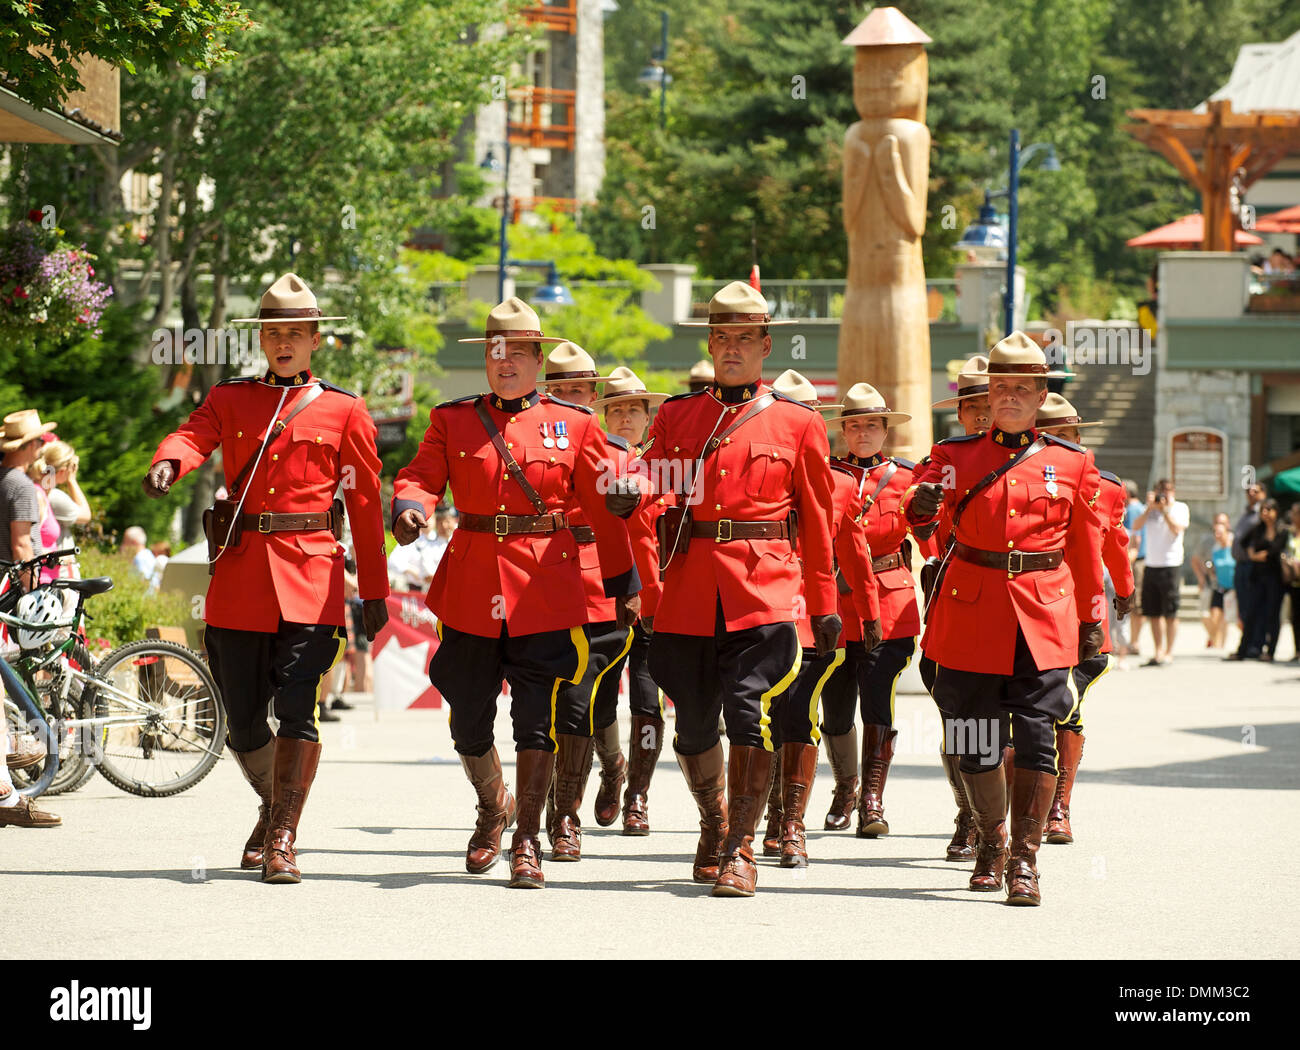 Royal Canadian Mounted Police officers in formal red serge uniforms parade through Whistler BC, Canada Stock Photo